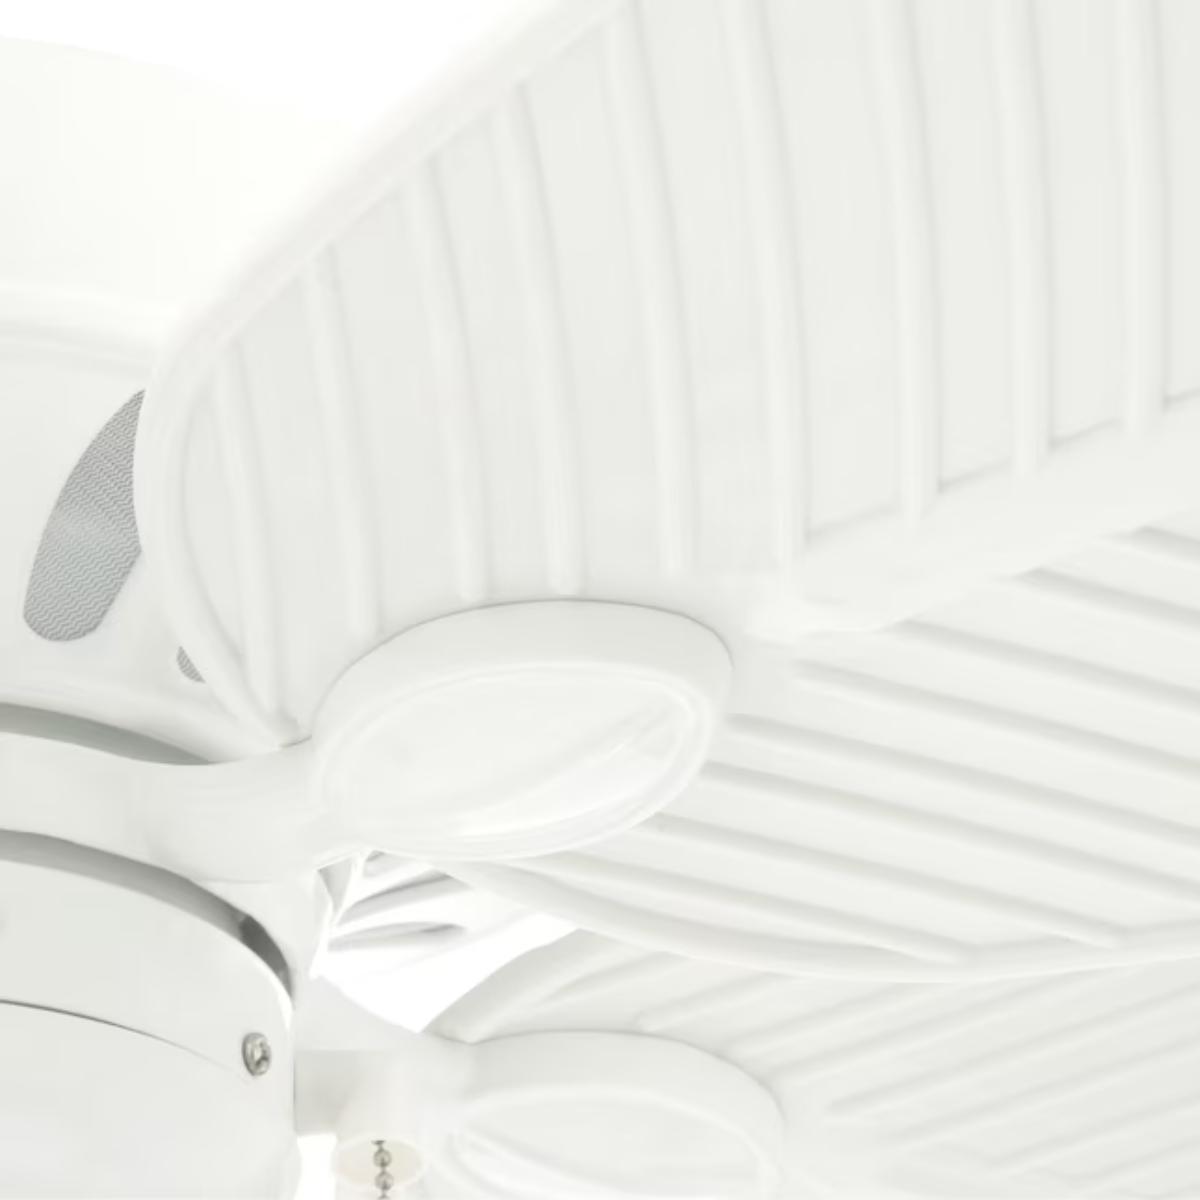 Cruise 52 In. Outdoor Tropical Leaf Blades Ceiling Fan with Pull Chain, White Finish - Bees Lighting